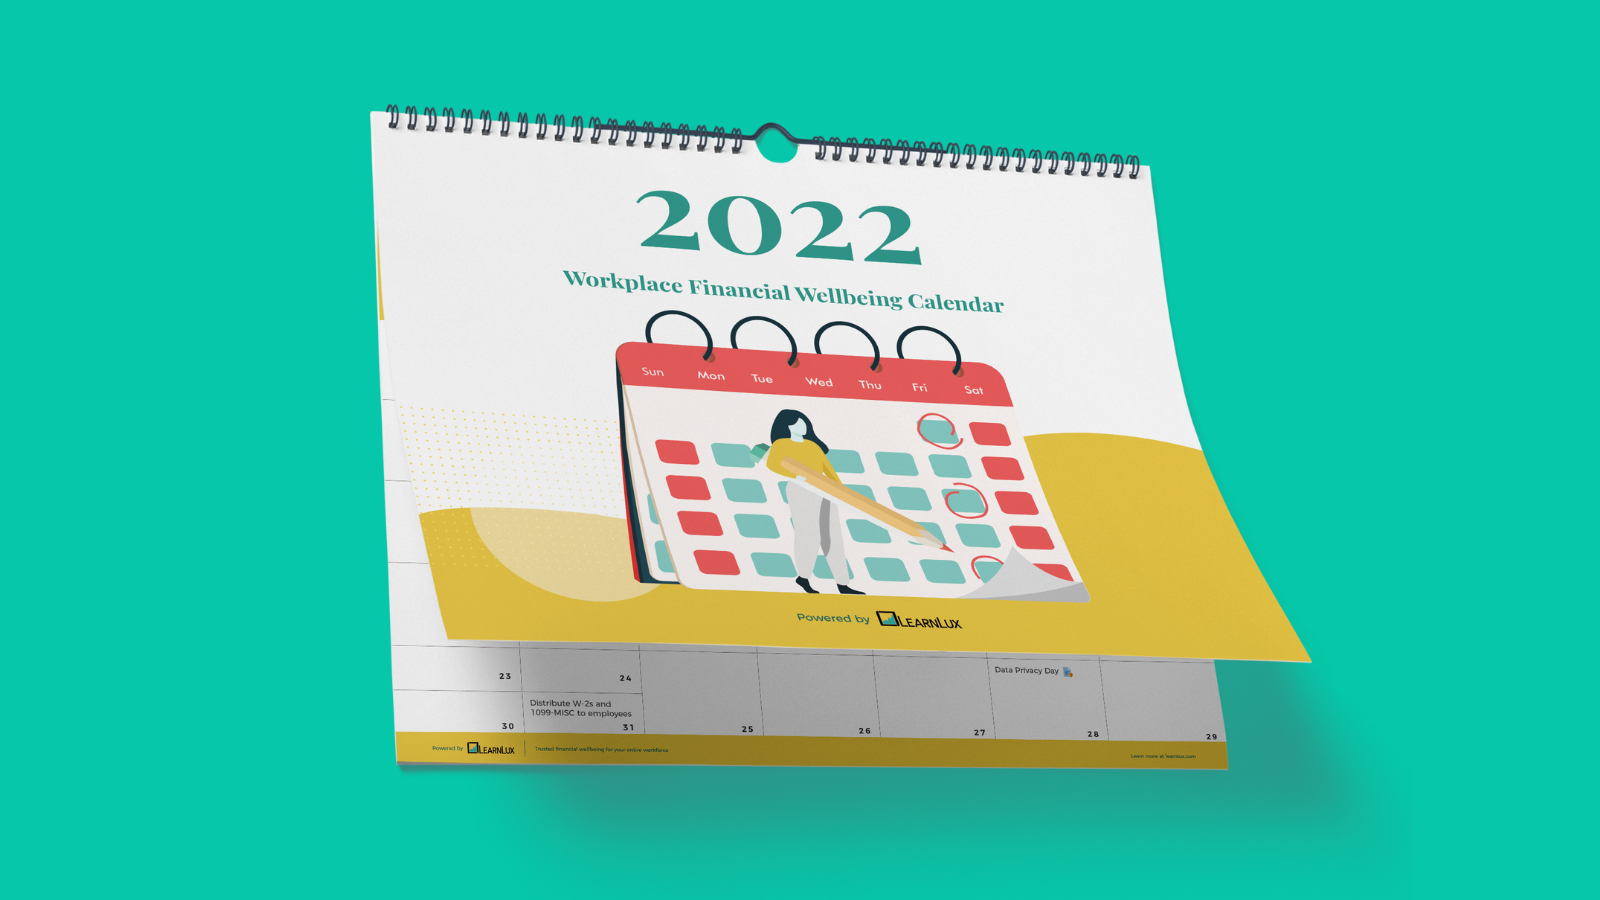 Financial wellbeing calendar with 2022 dates, holidays, themes and more